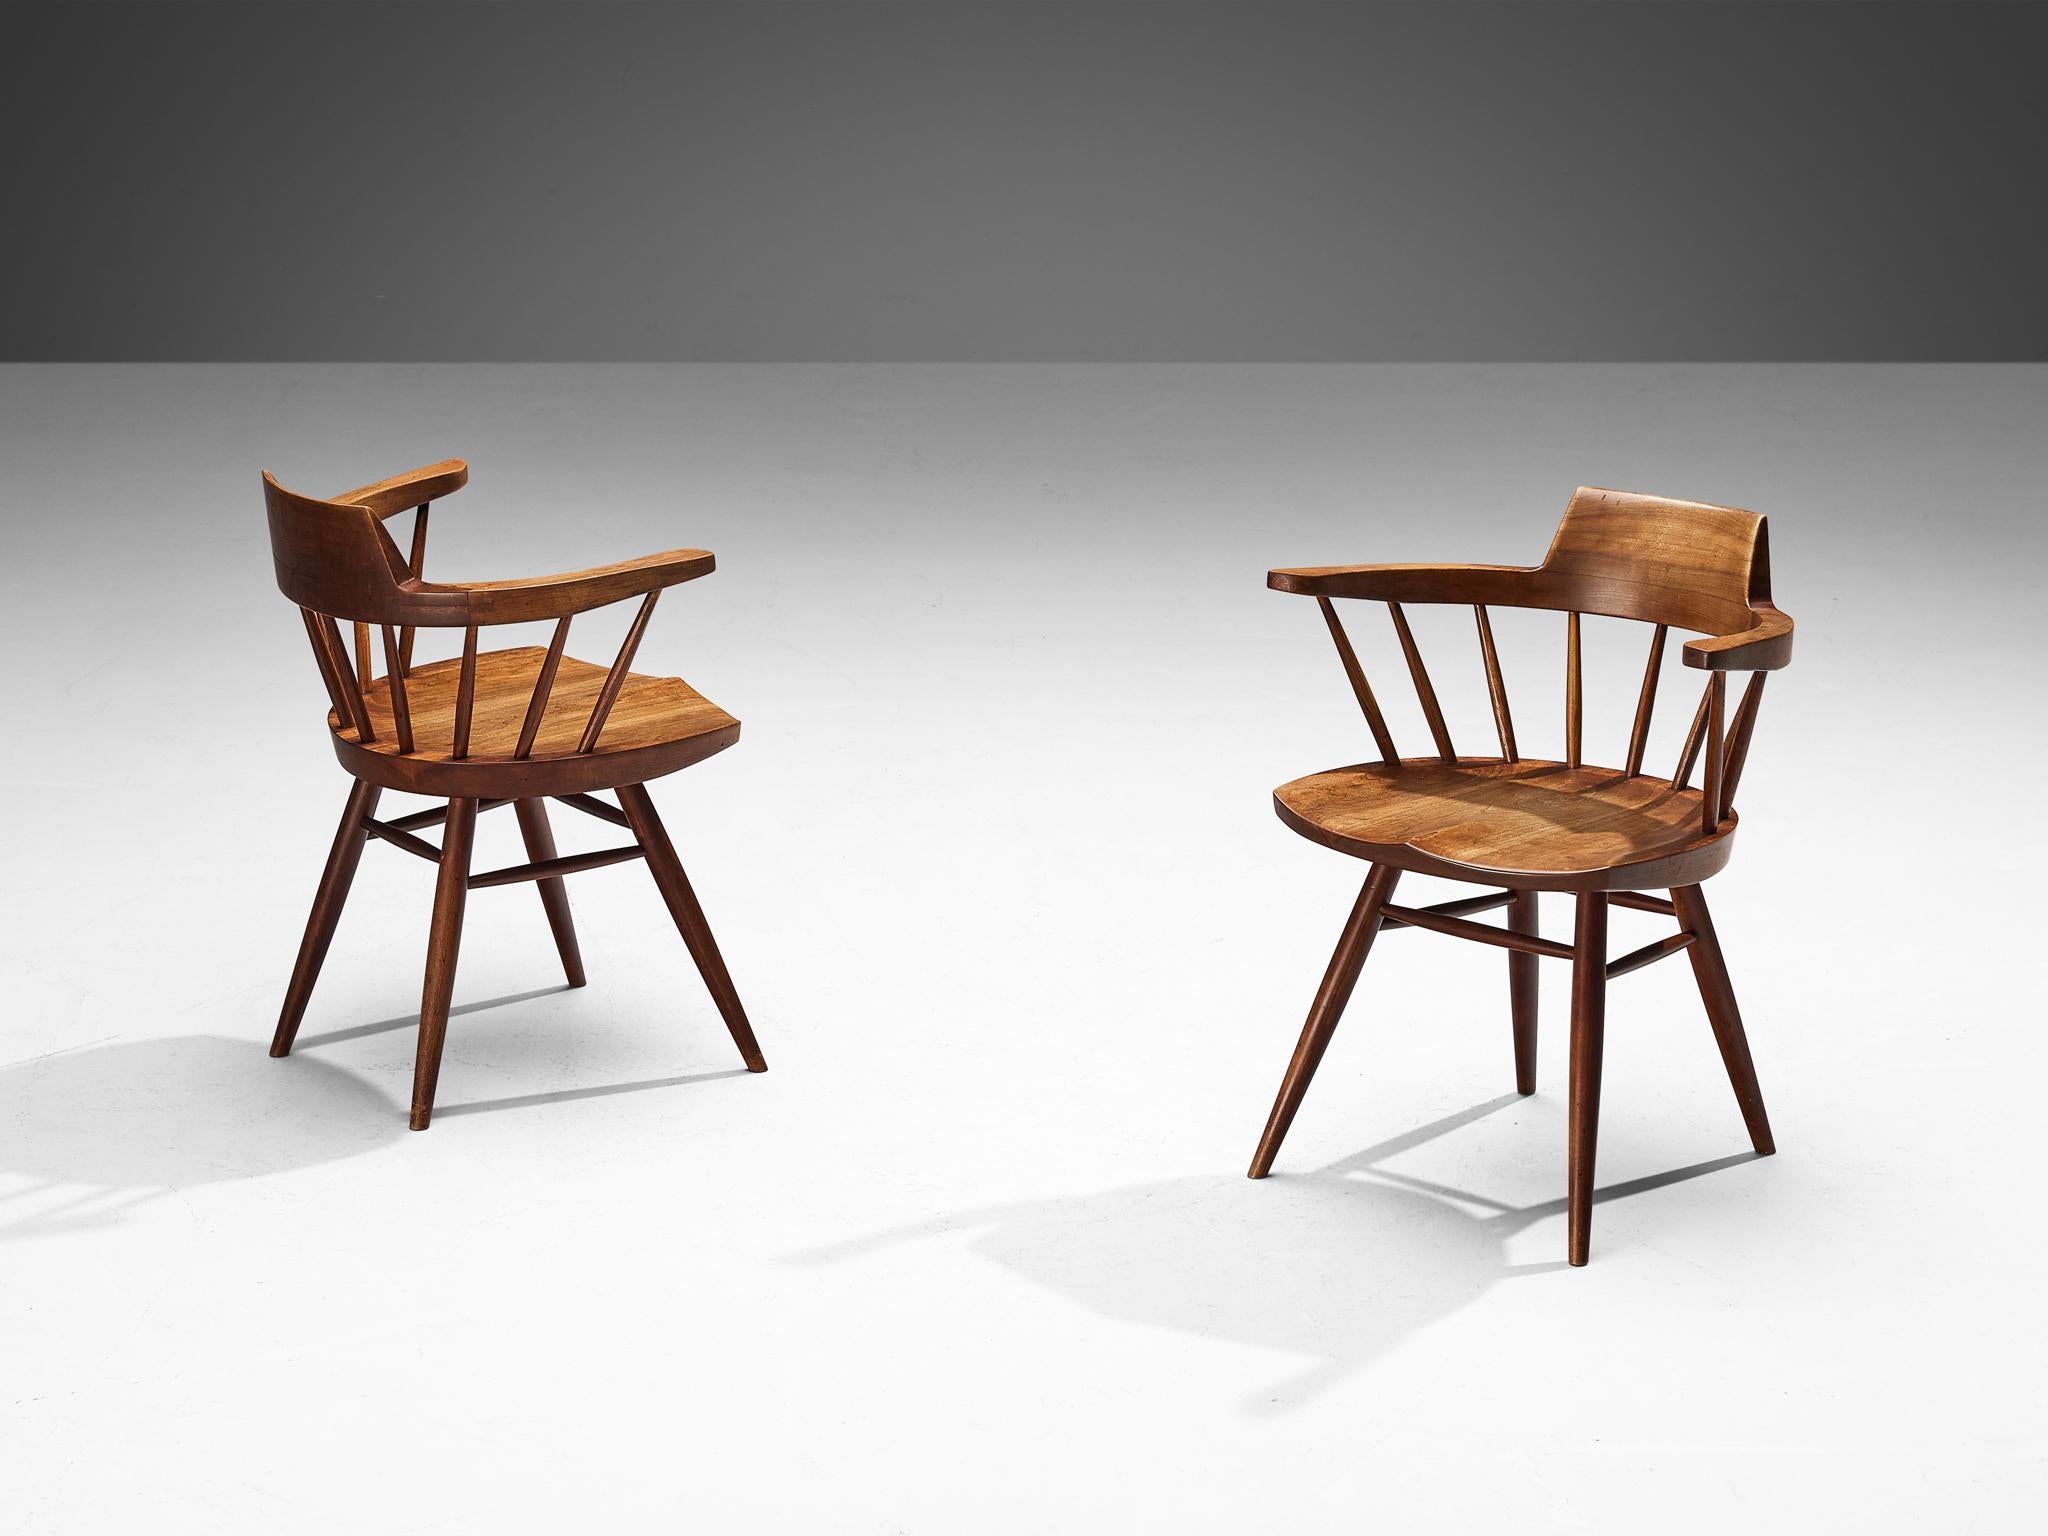 George Nakashima for Nakashima Studio, captain’s chairs or armchairs, cherry, United States, 1982

With regard to its essential form, material use, and woodwork, this pair of captain’s chairs is a testimony to George Nakashima's expert craftsmanship